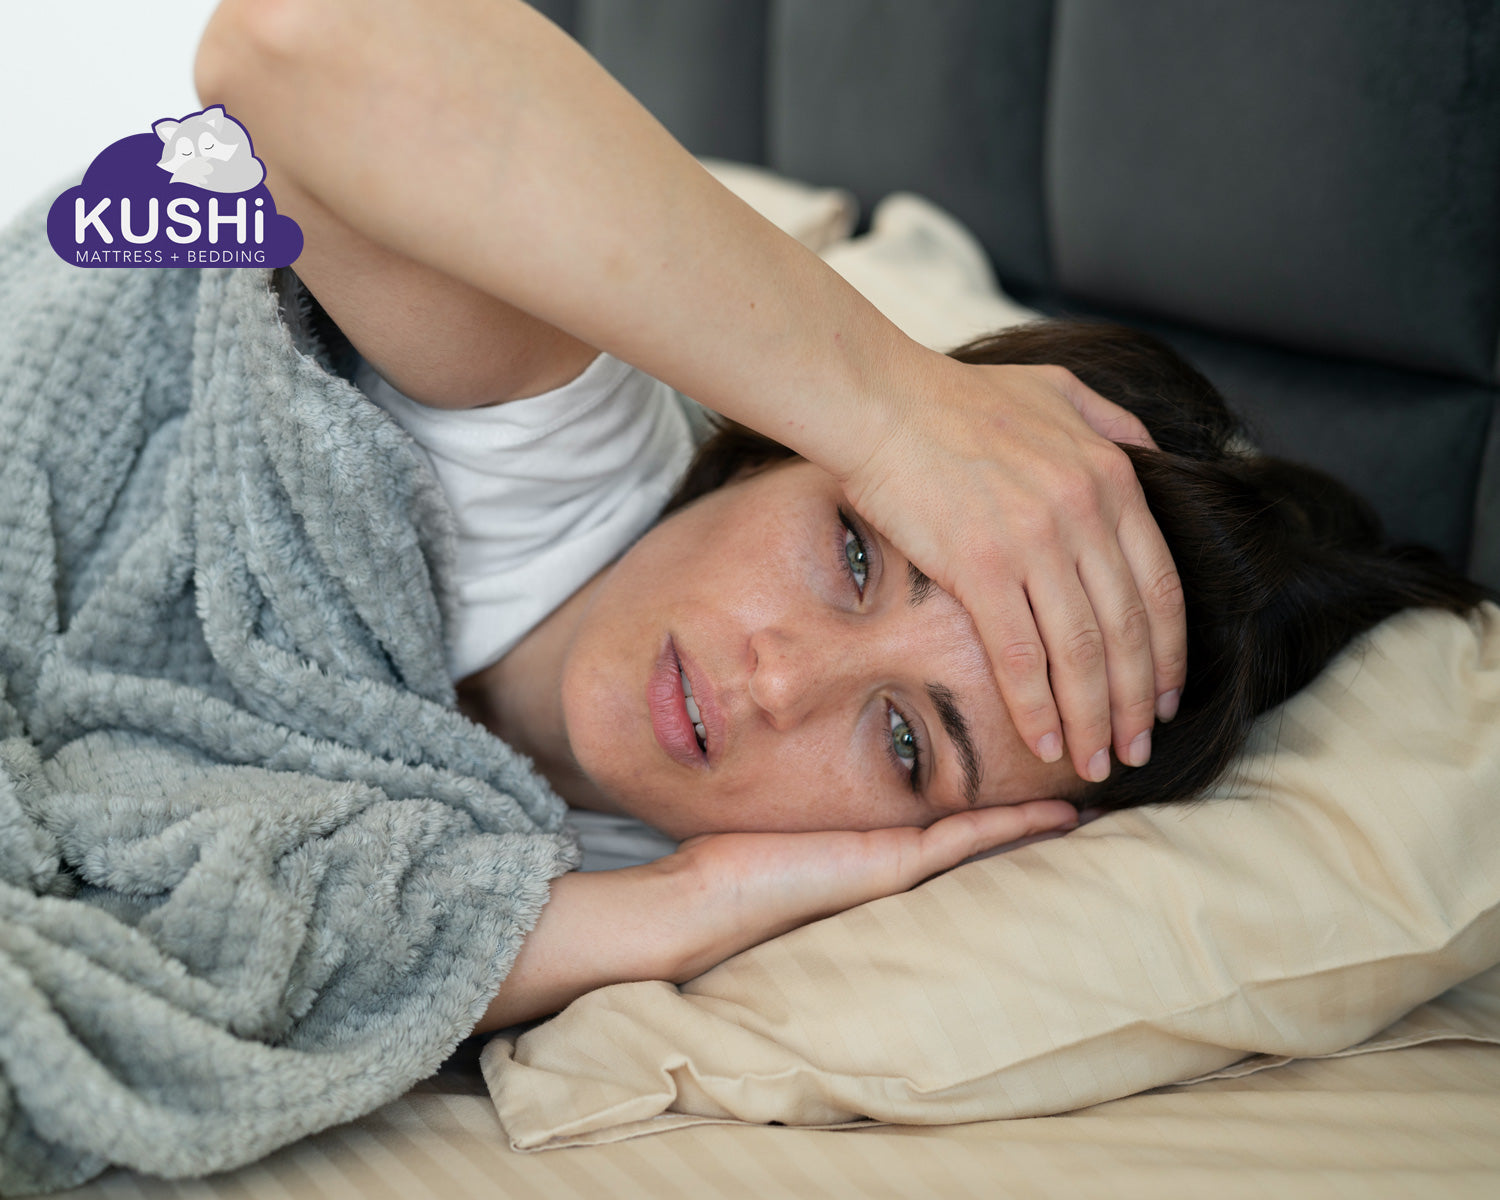 Night Sweats - Hot Sleepers! What's that and how can we help?